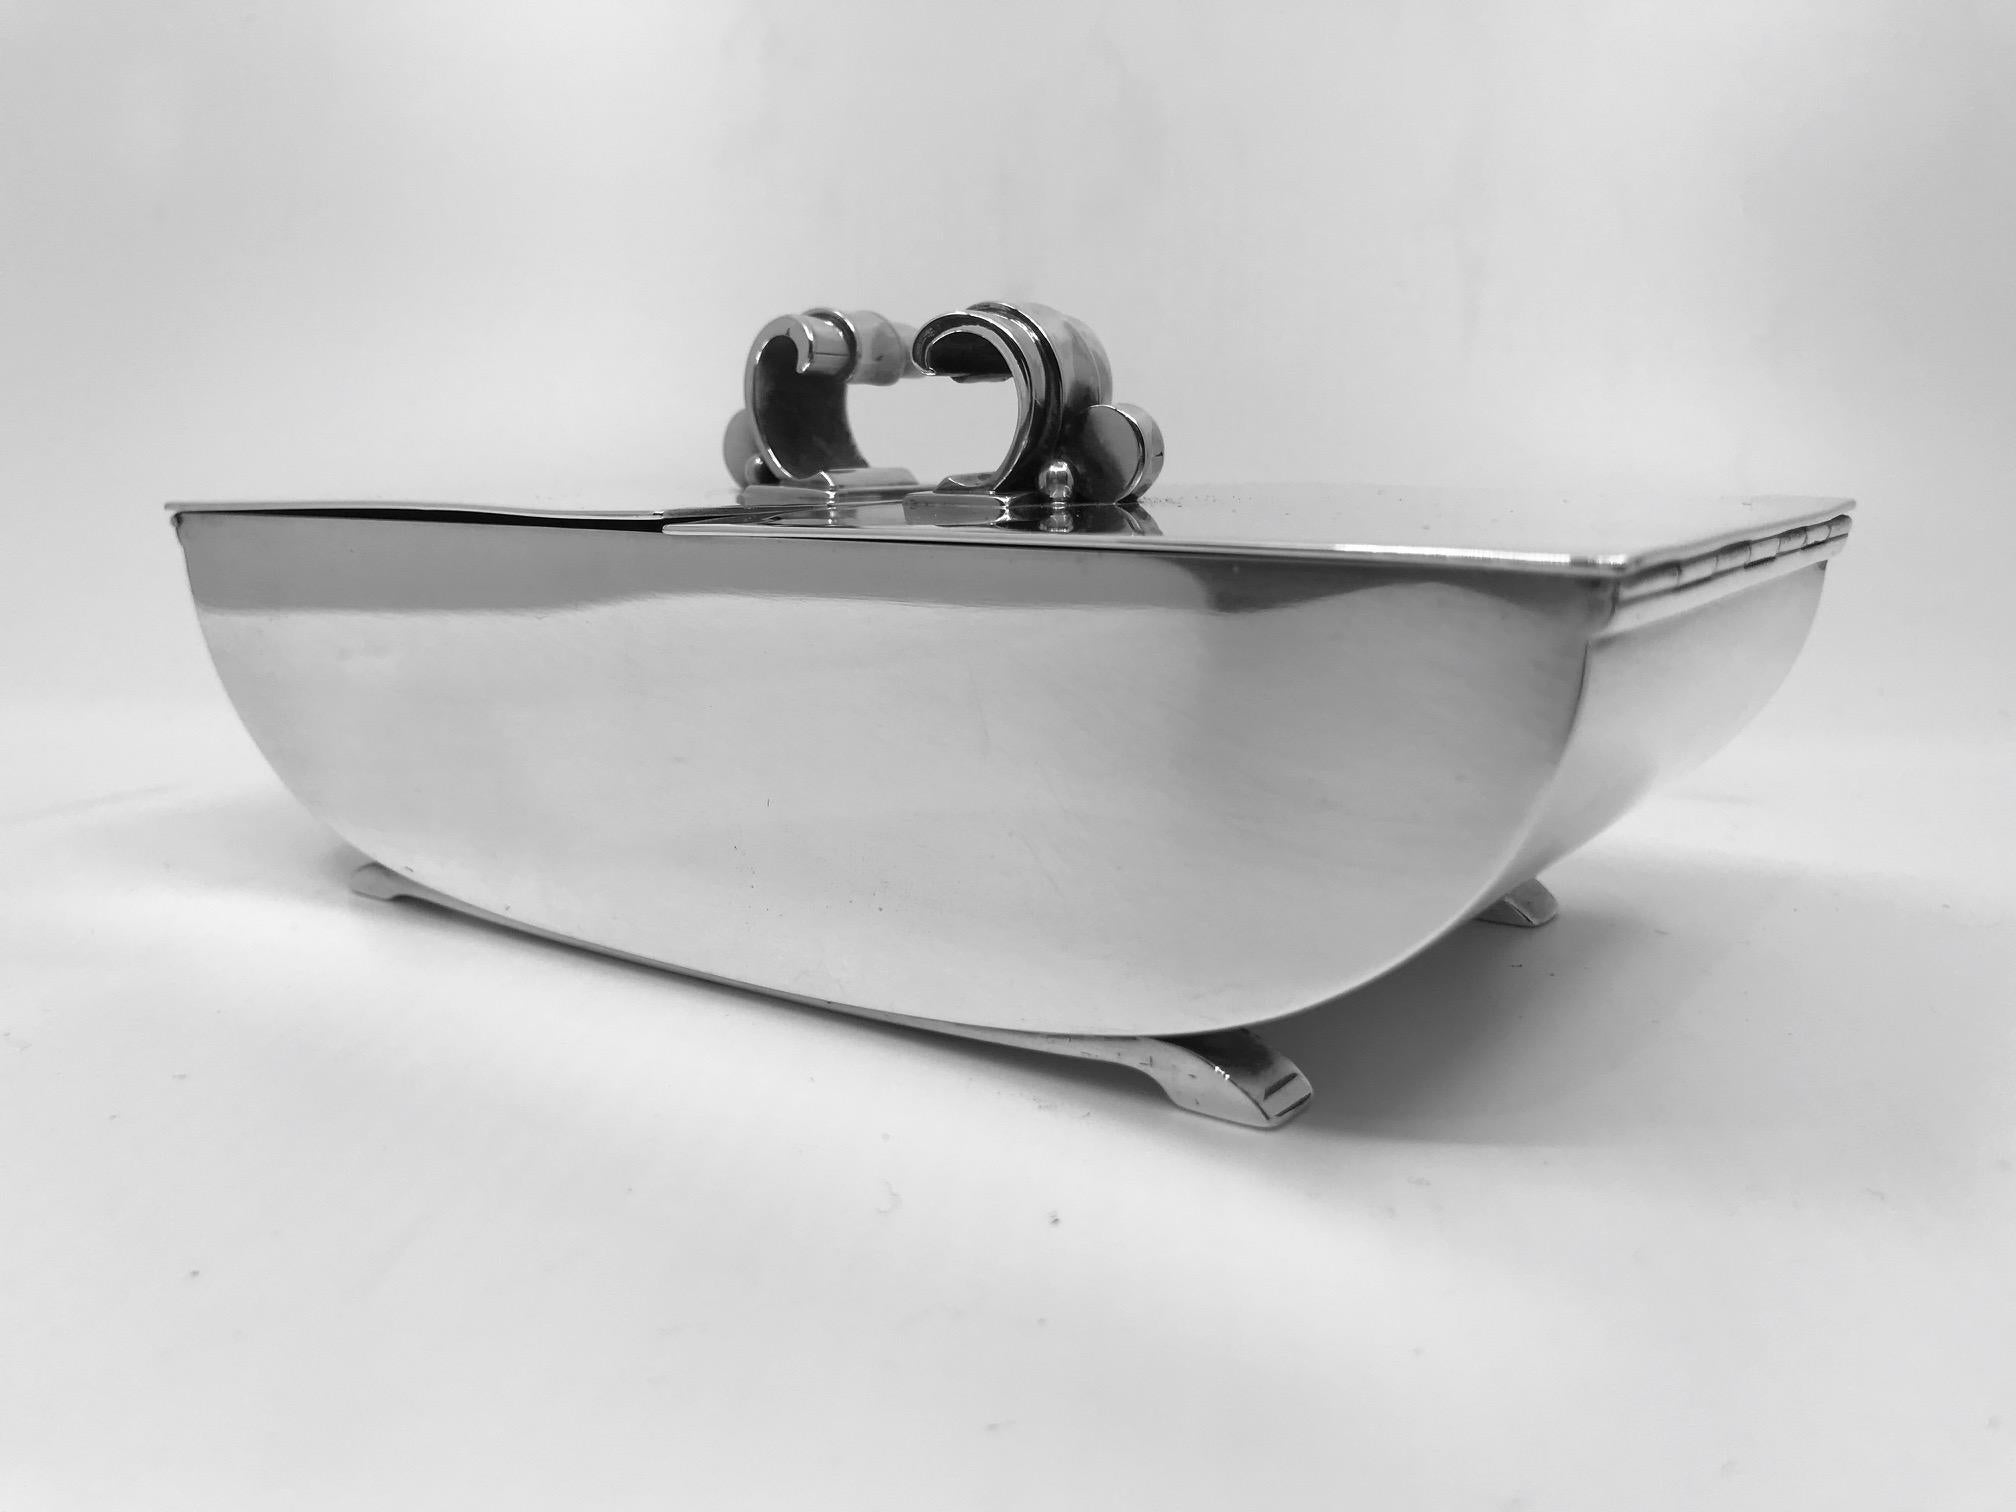 Vintage sterling silver Georg Jensen Art Deco Box, design #833 by Harald Nielsen. The box is divided into two sections with a separate lid for each side, hinged at each end. The divider is removable for larger items.

Measures 6 7/8? x 3 1/8? and